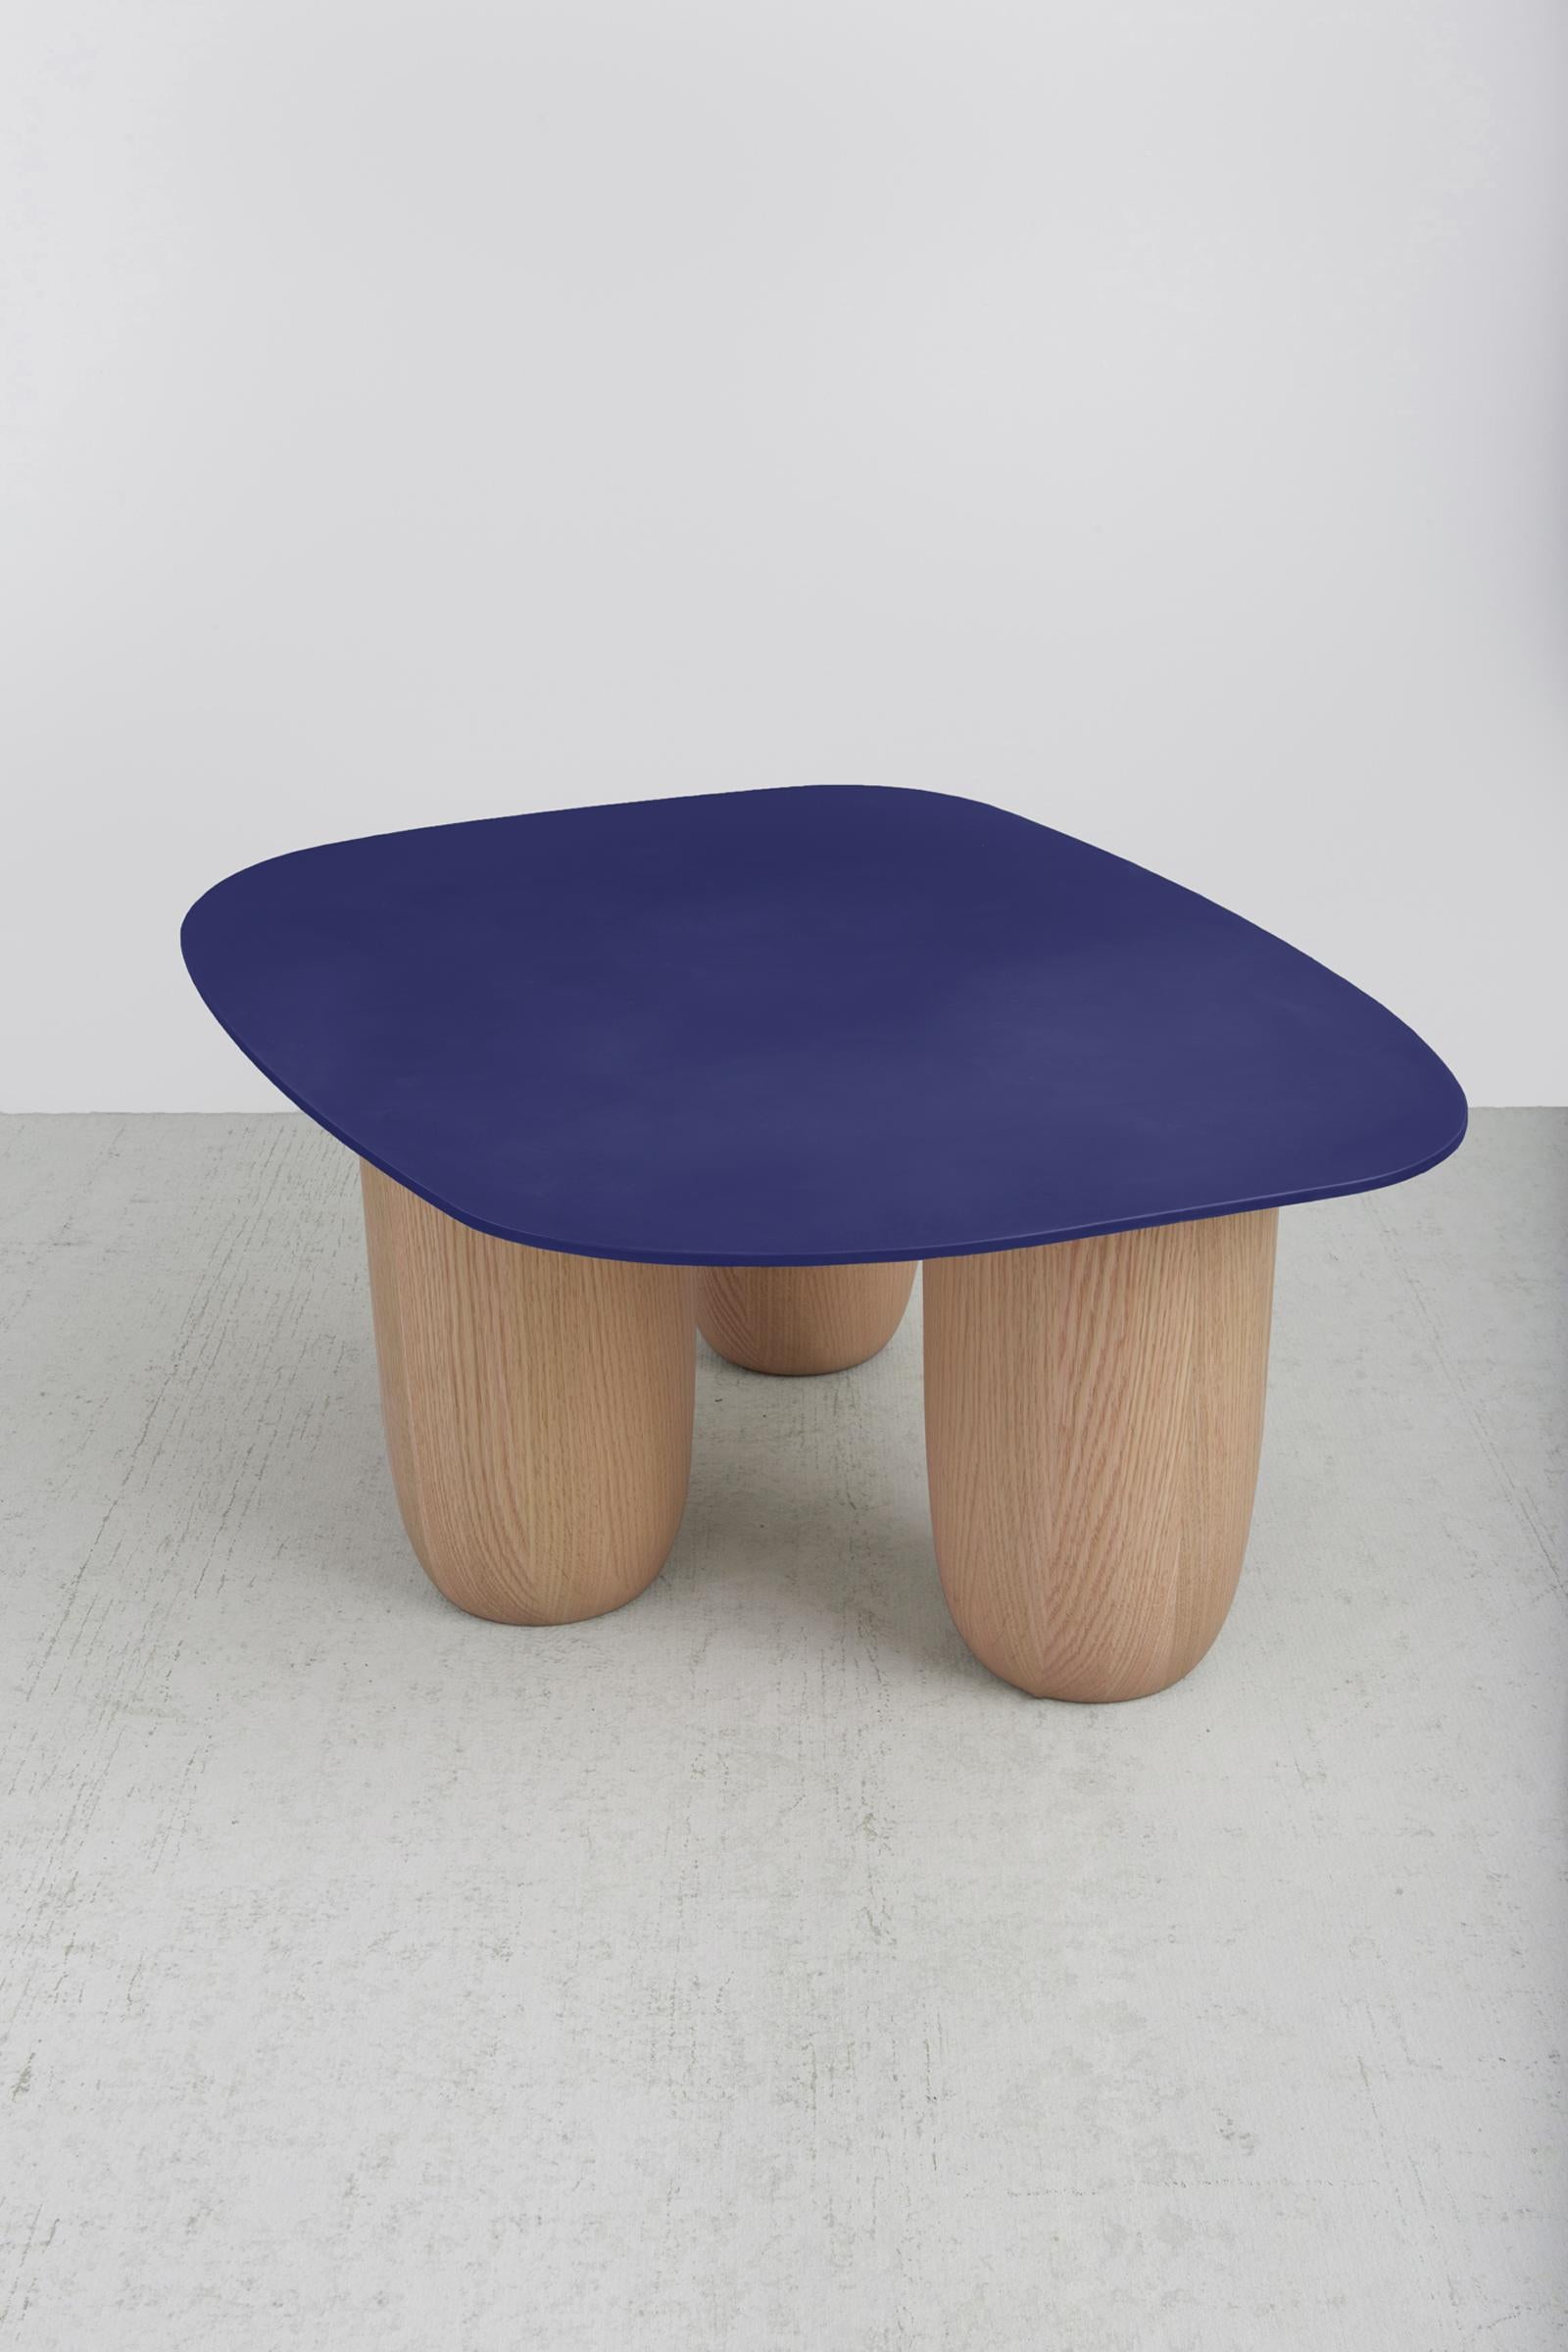 American Contemporary Low Tables Blue Steel Top with Natural Oak Legs by Vivian Carbonell For Sale